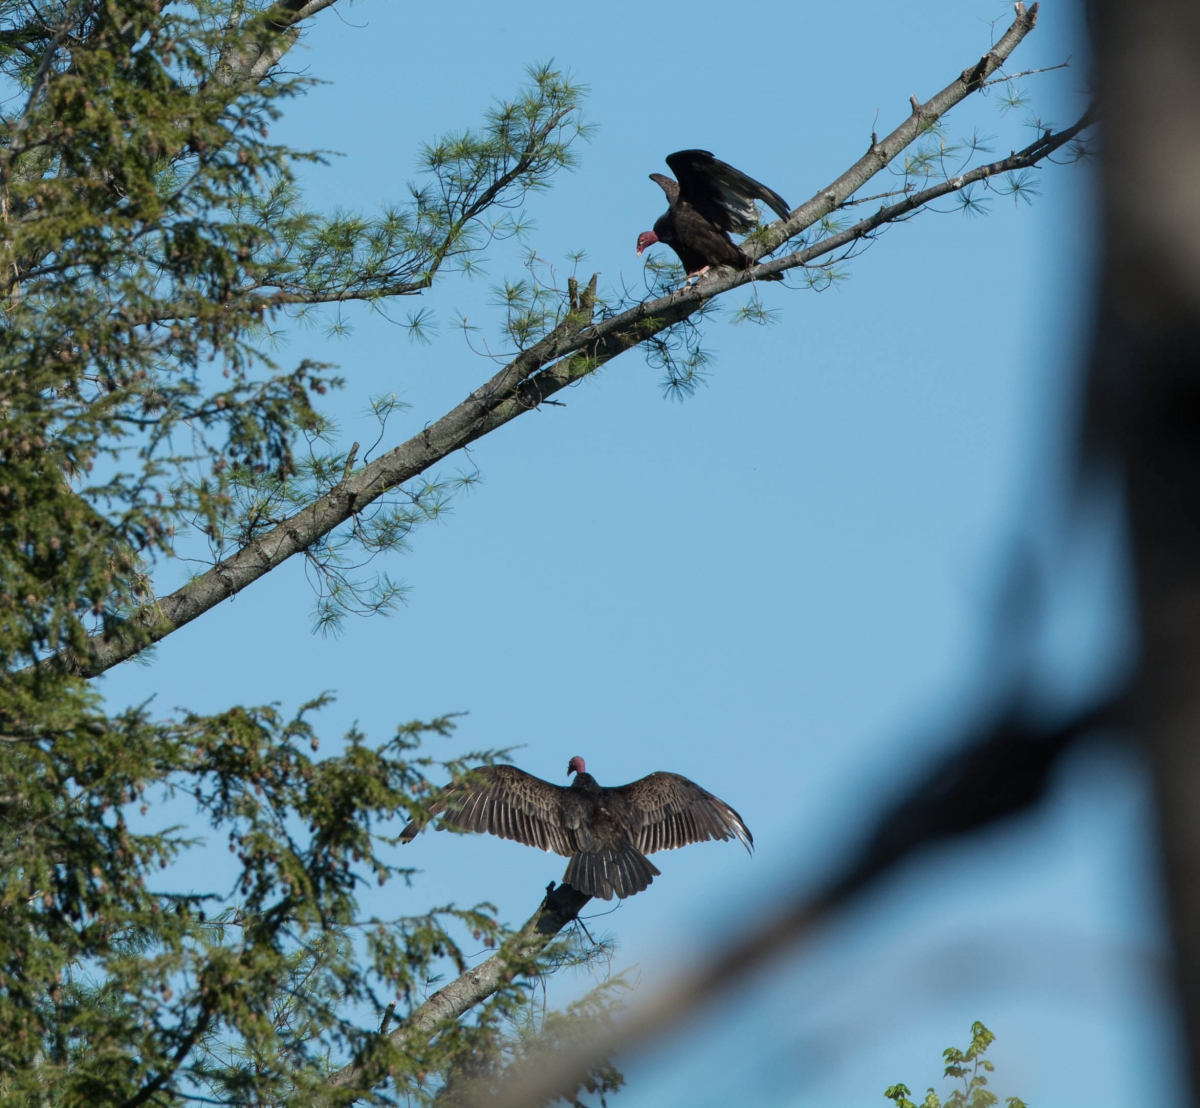 Two Turkey vultures spread their wings while perched near a tree top.